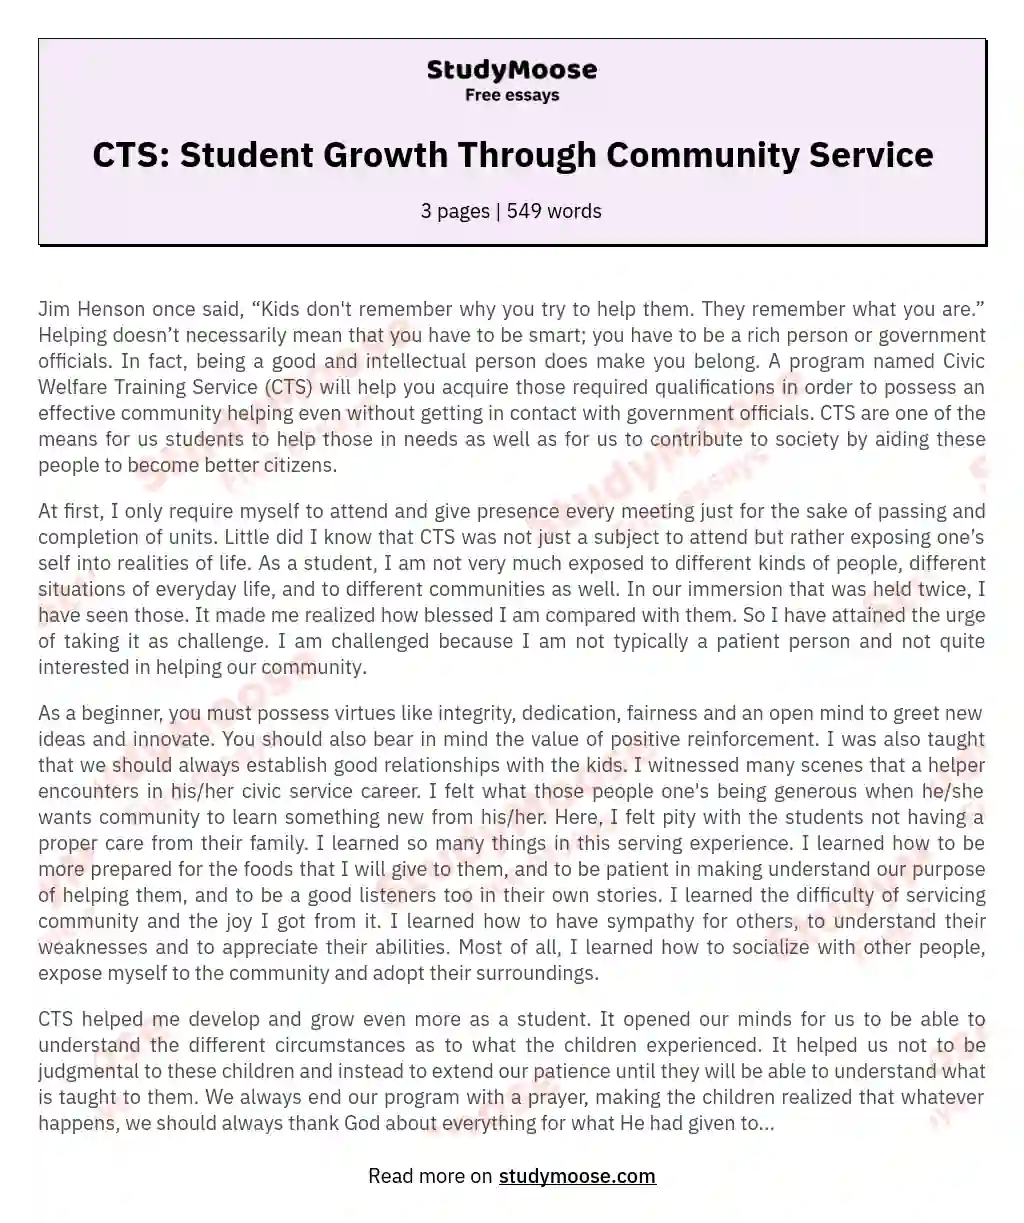 CTS: Student Growth Through Community Service essay